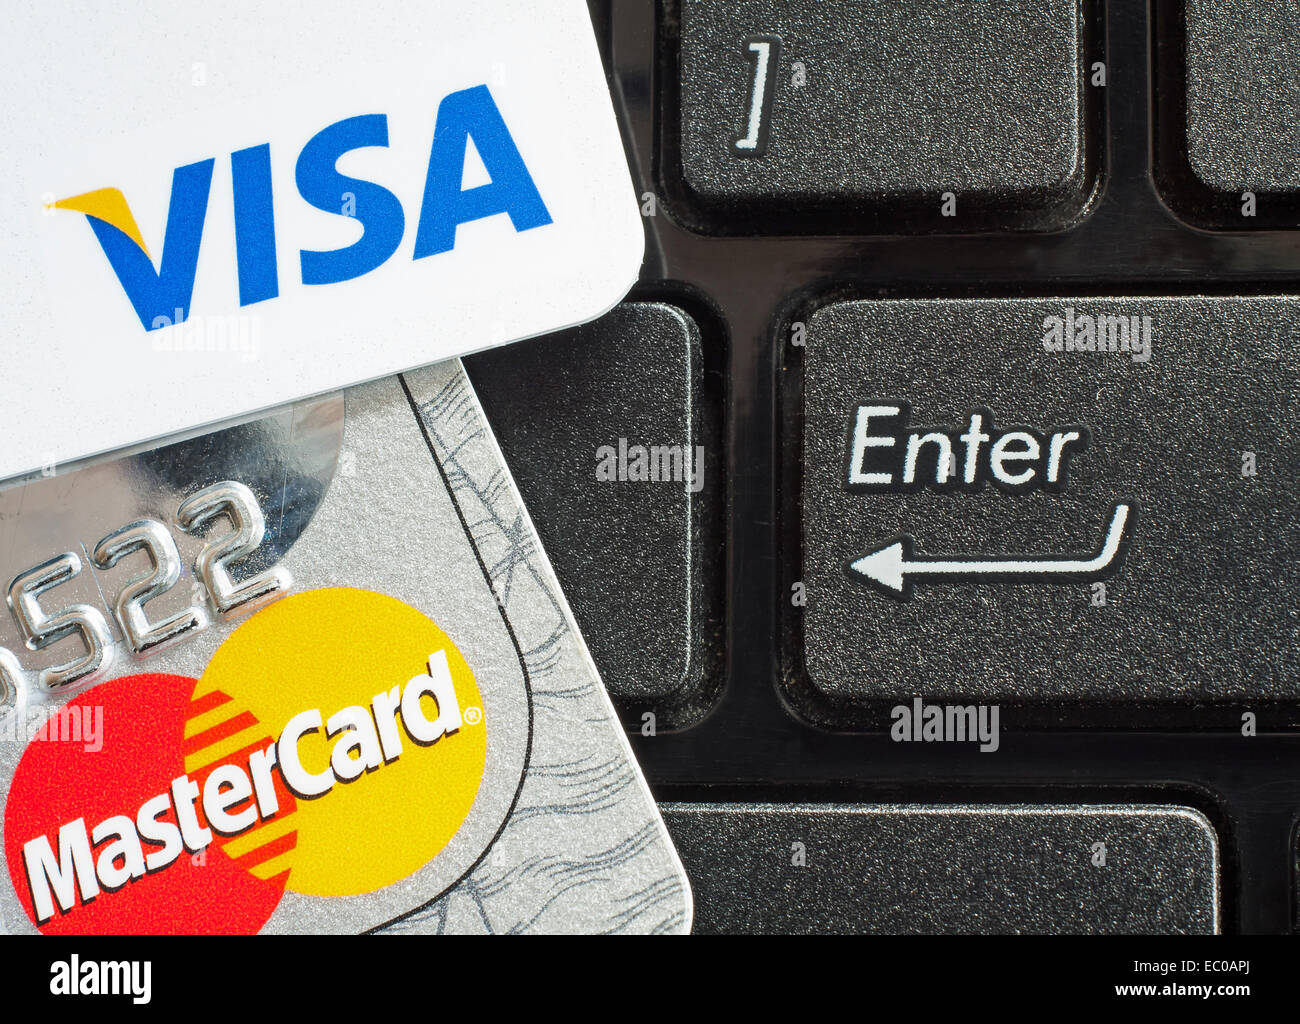 GDANSK, POLAND - 10 JULY 2014. Visa card and Mastercard card on the notebook keyboard. Editorial use only Stock Photo